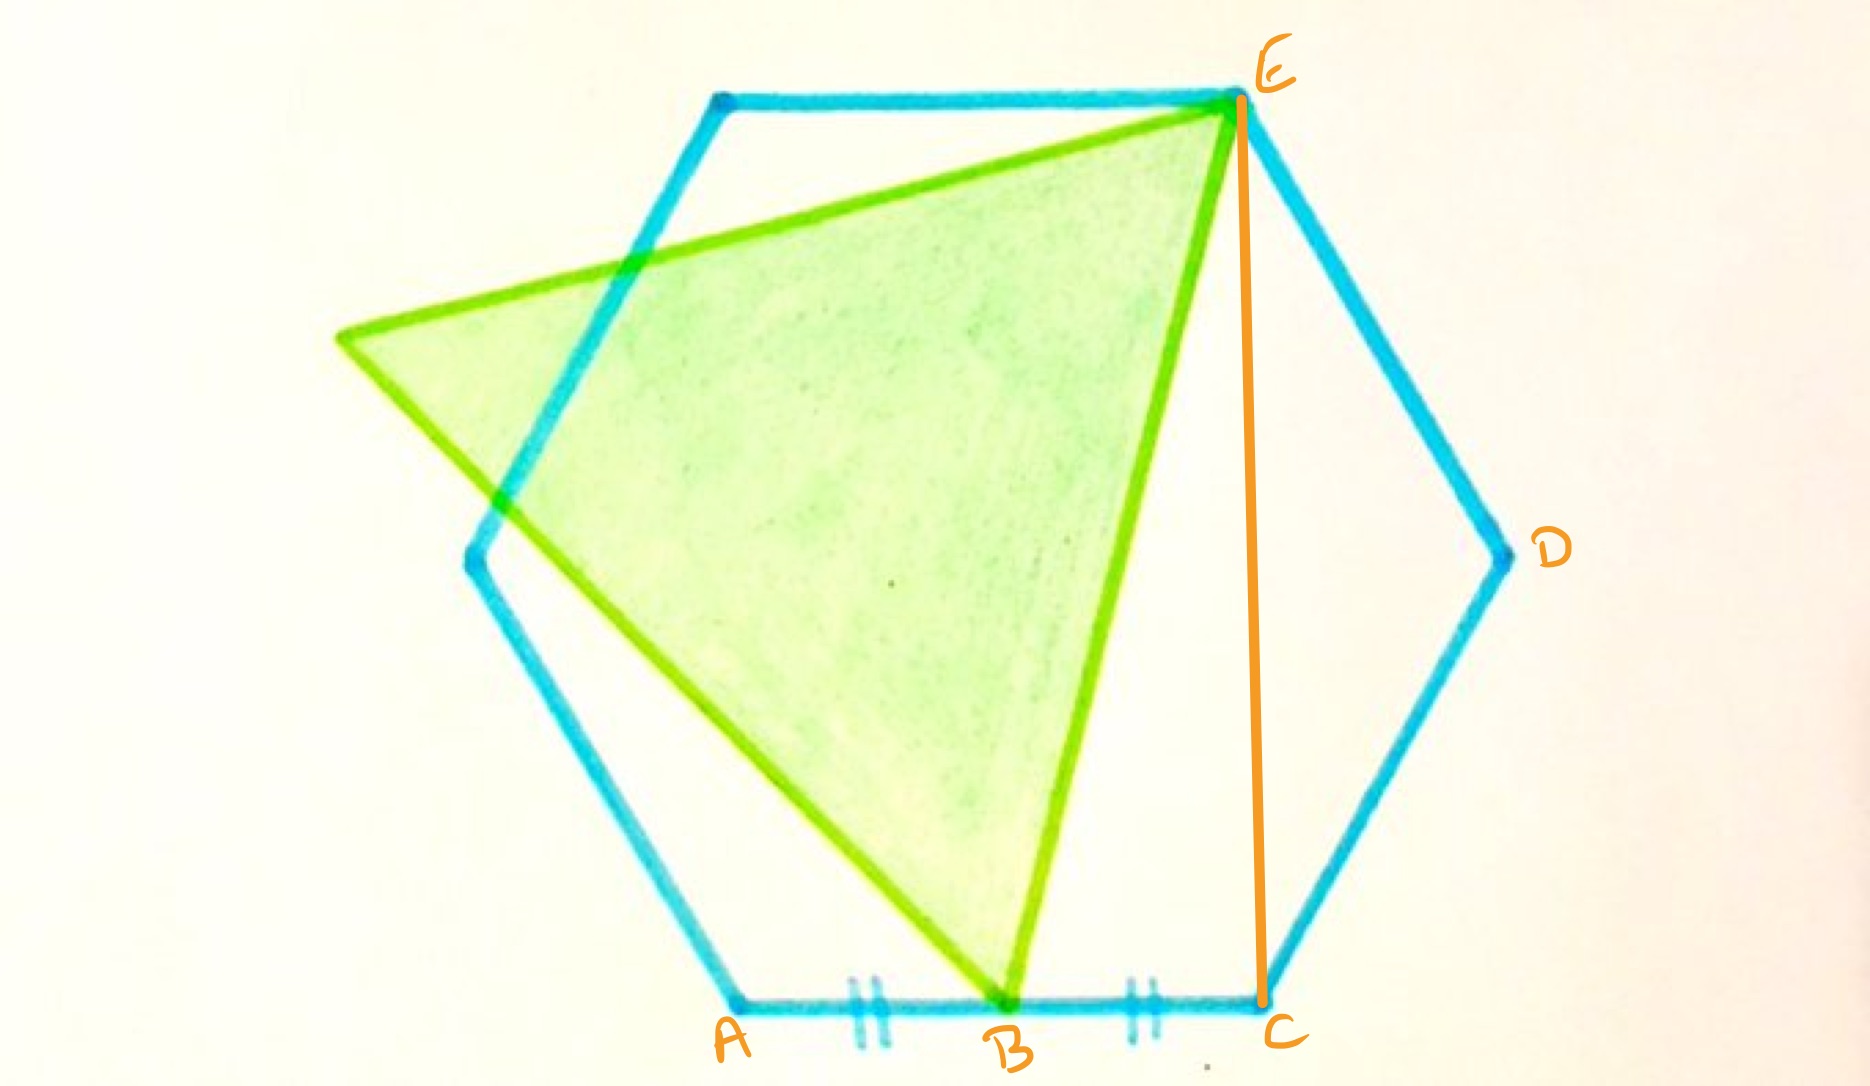 Triangle overlapping a hexagon labelled